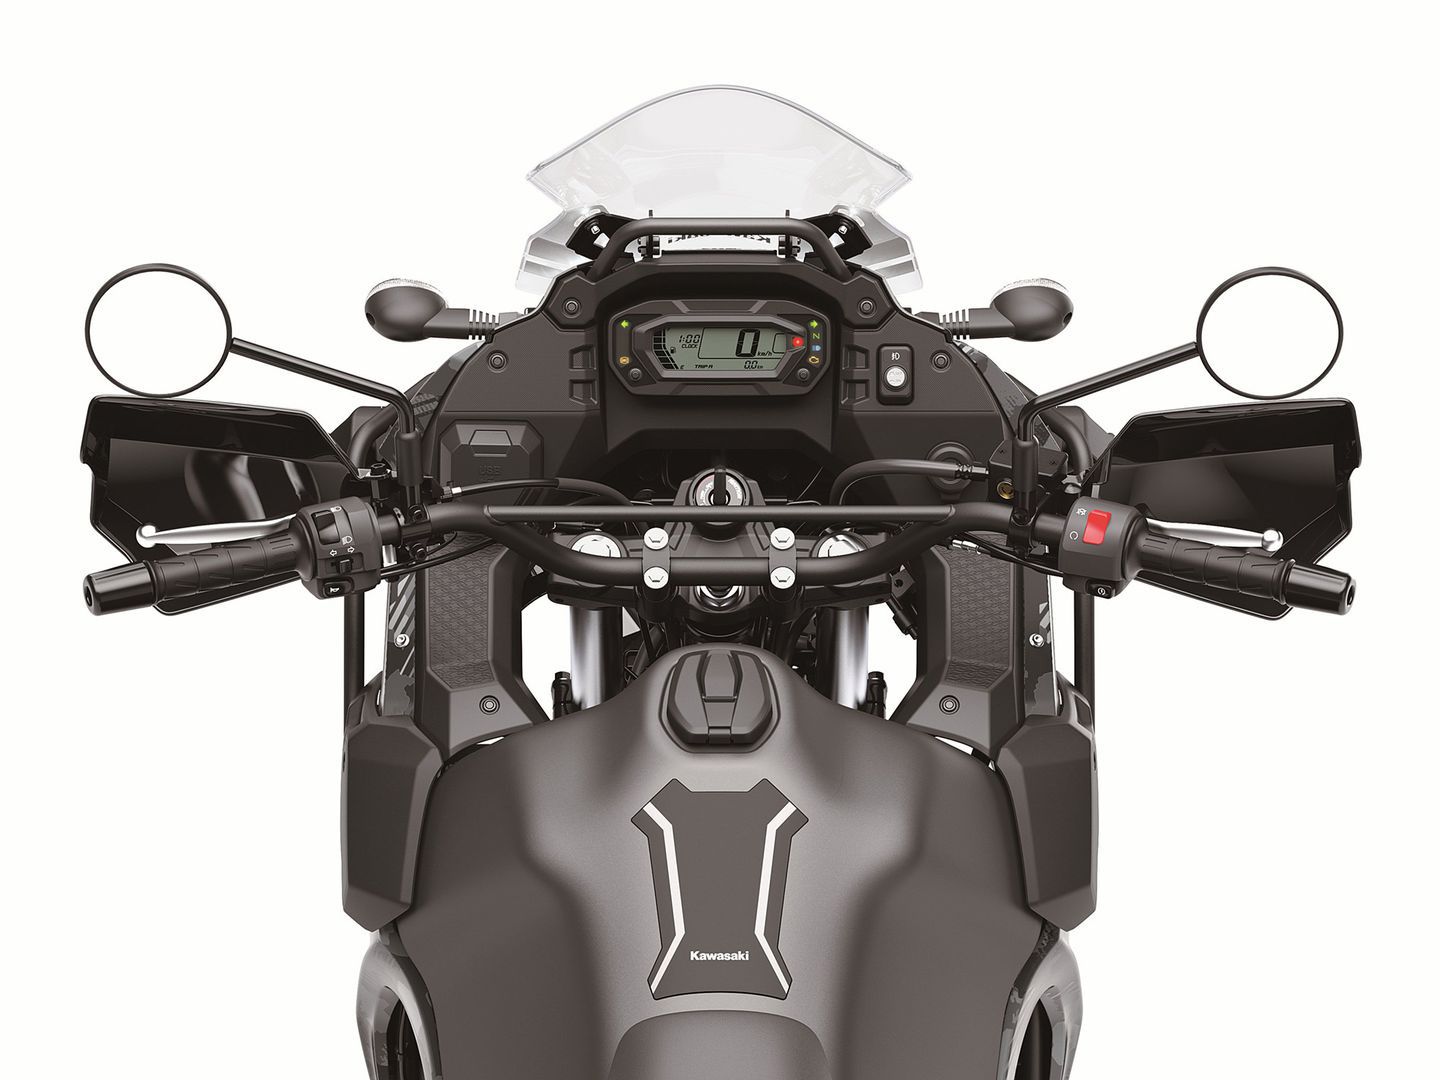 The 2022 KLR’s cockpit: a new LCD instrument pod; wider, rubber-mounted handlebar; wider mirrors; a taller, two-position adjustable windscreen; an integrated accessory mounting bar; and two optional power sockets.